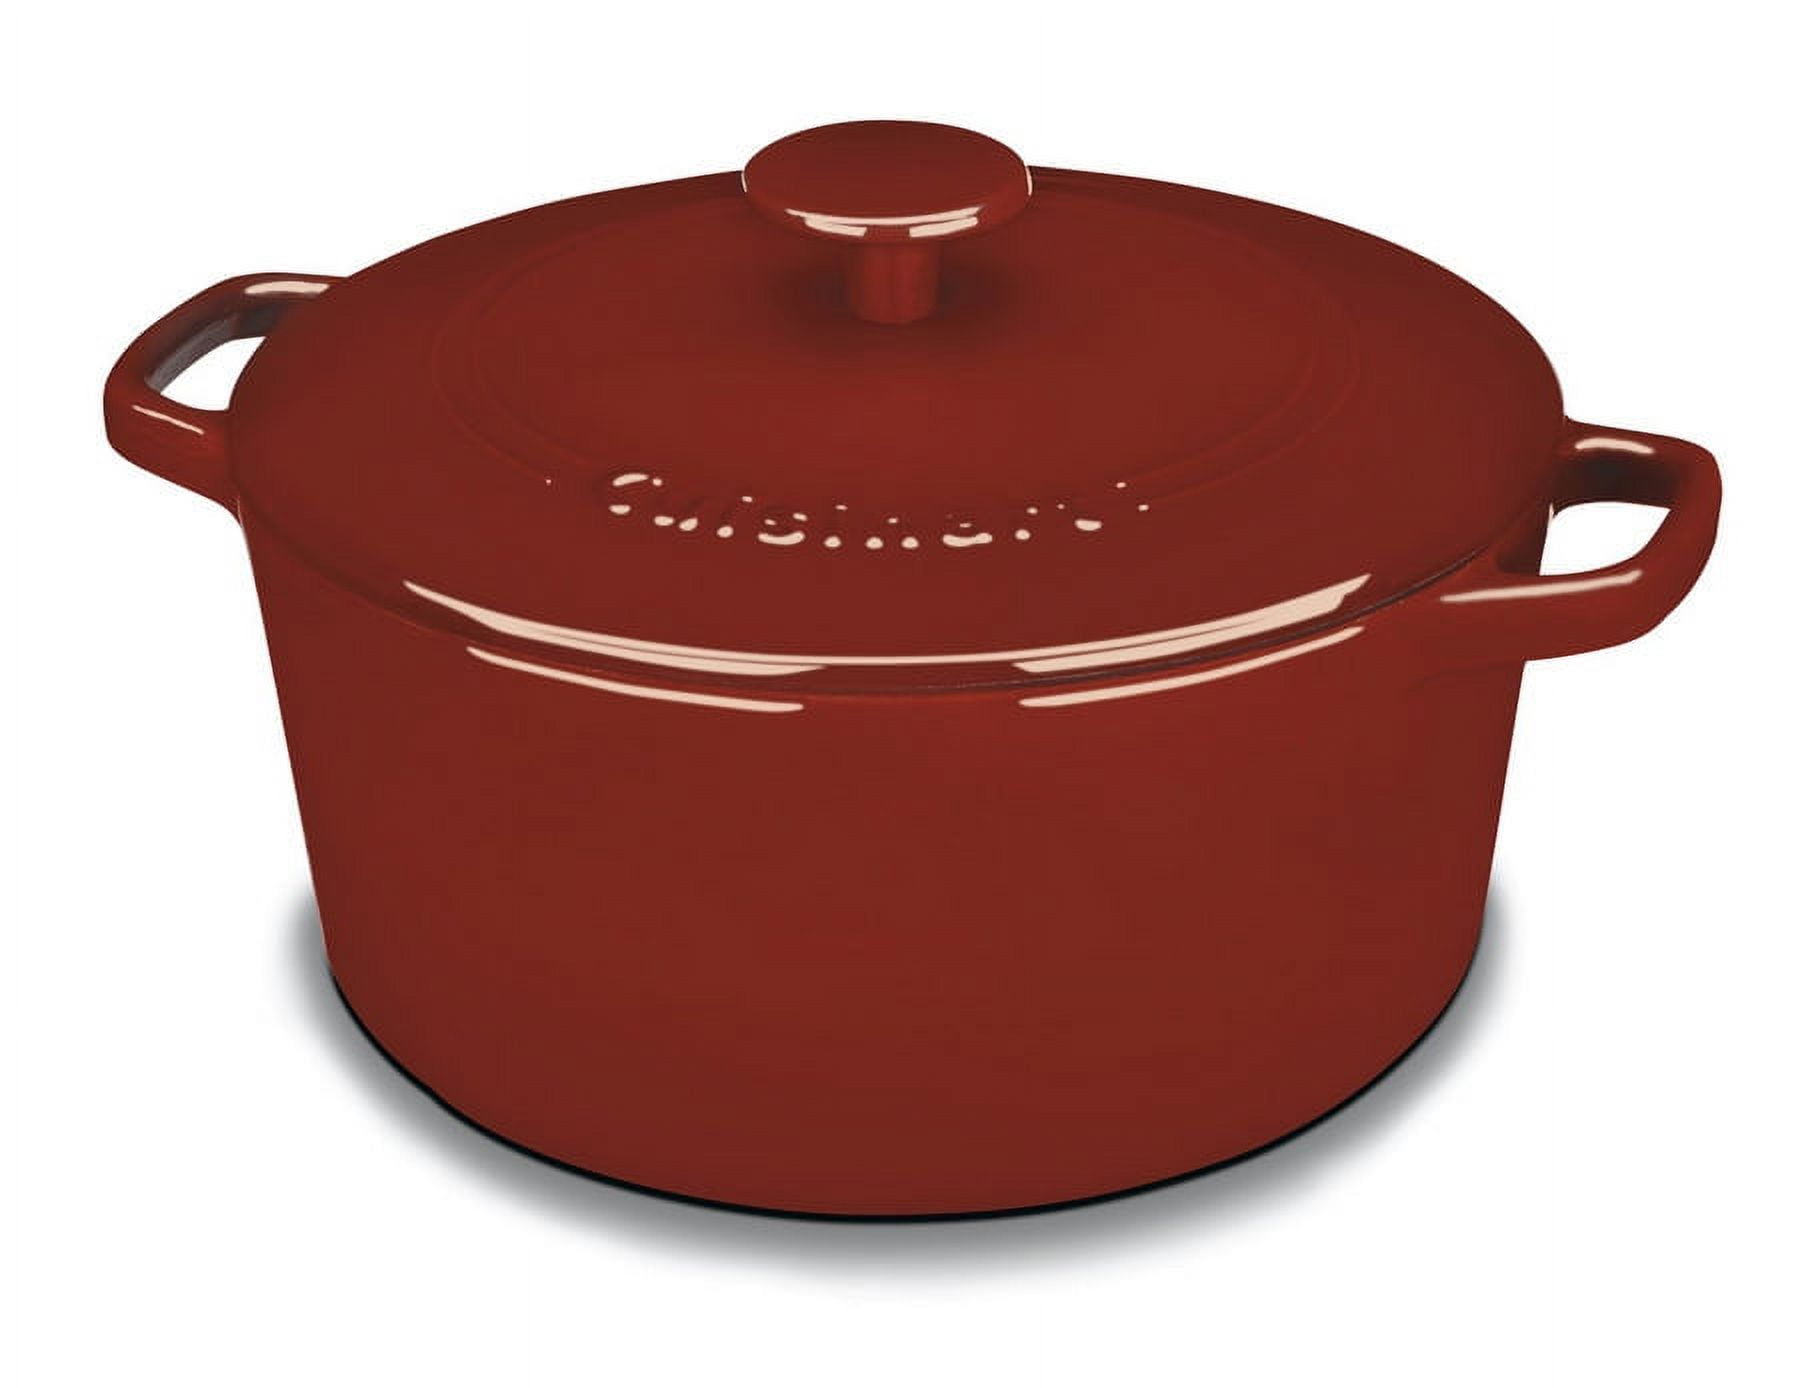 Cuisinart CI755-30CR Chef's Classic Enameled Cast Iron 5-1/2-Quart Oval  Covered Casserole, Cardinal Red - Bed Bath & Beyond - 24031444